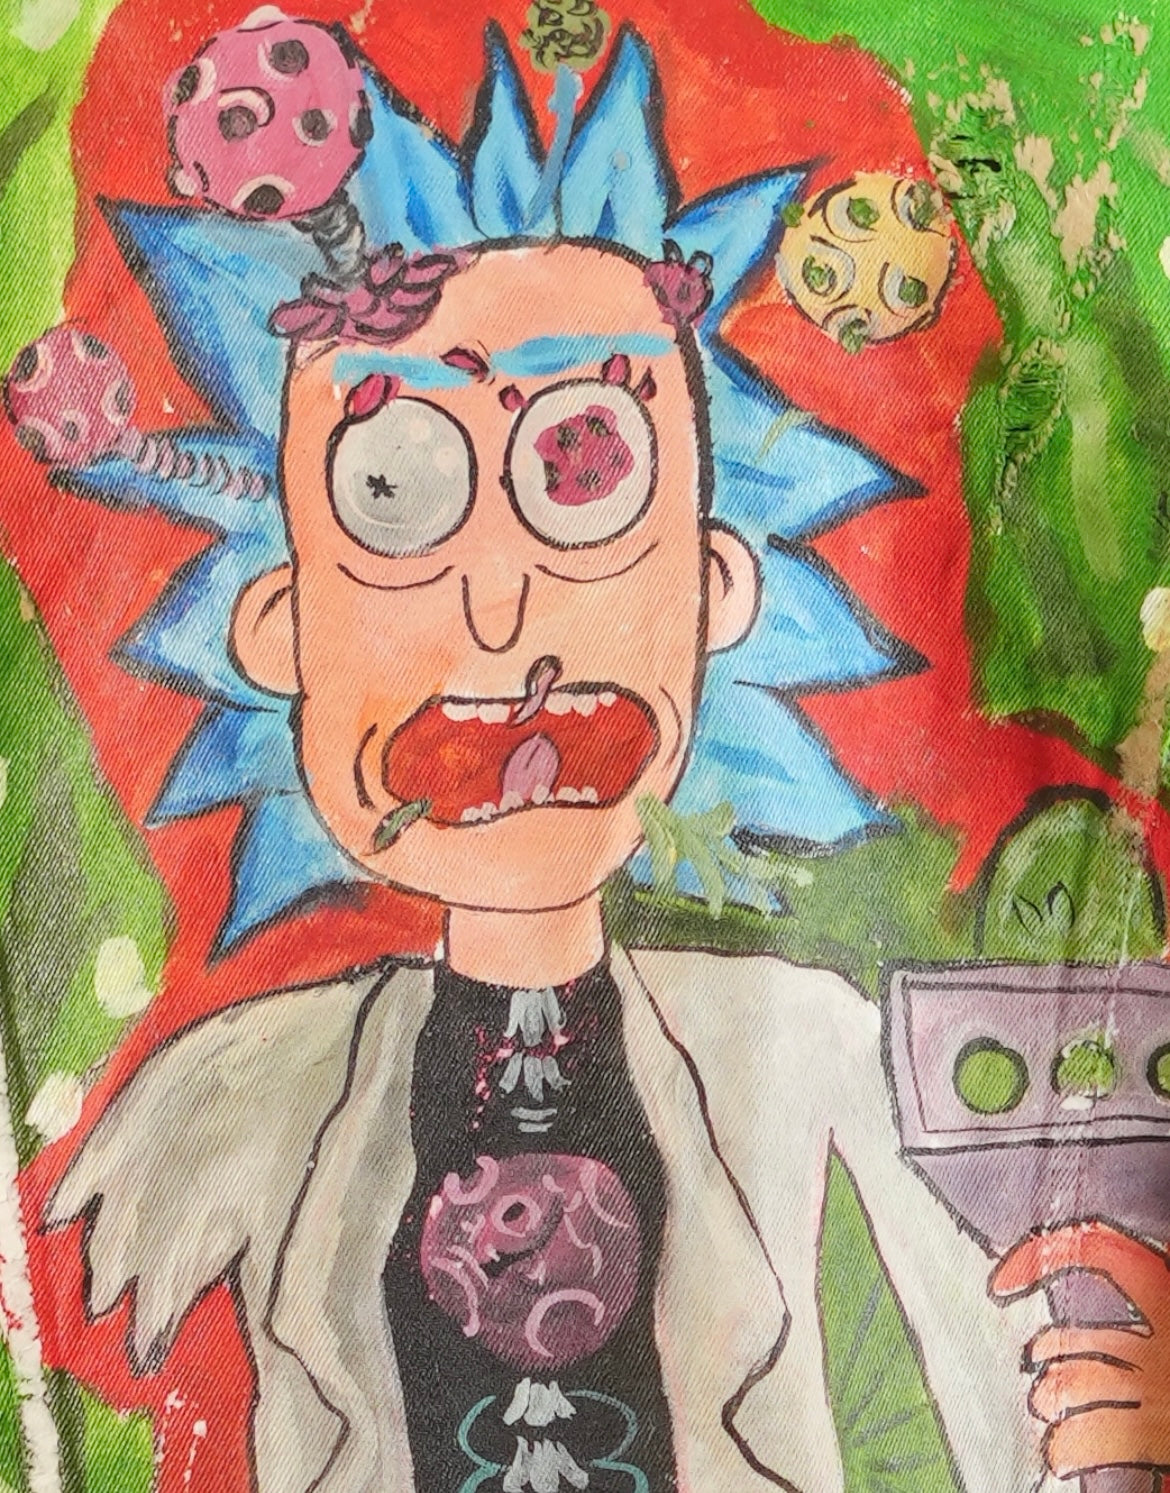 Rick and Morty Handpainted Jacket